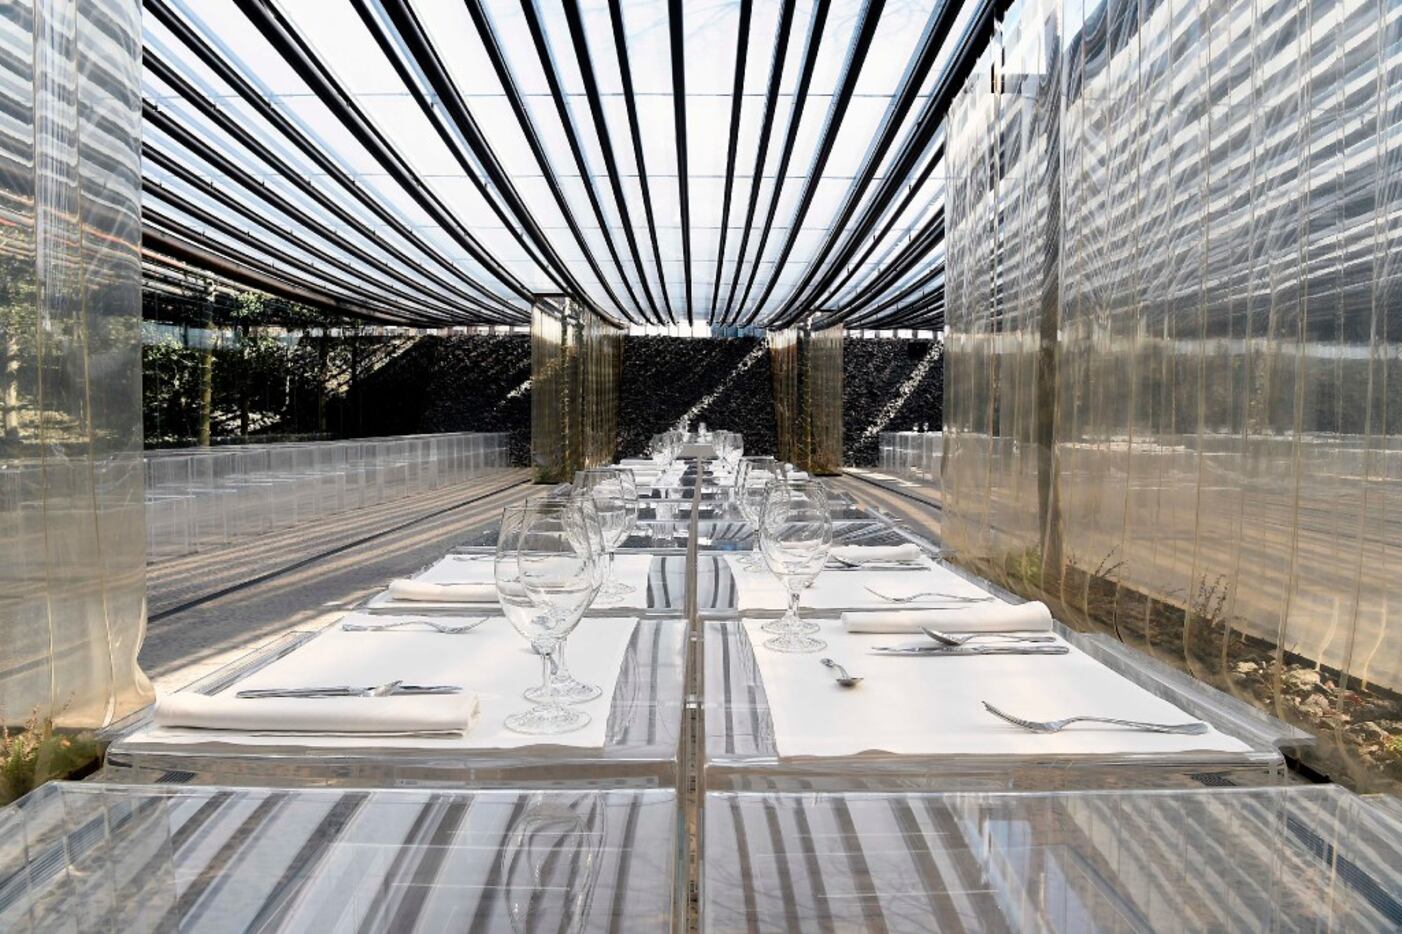 This dining room of the restaurant "les Cols" in Olot, Spain, was designed by prize-winning...